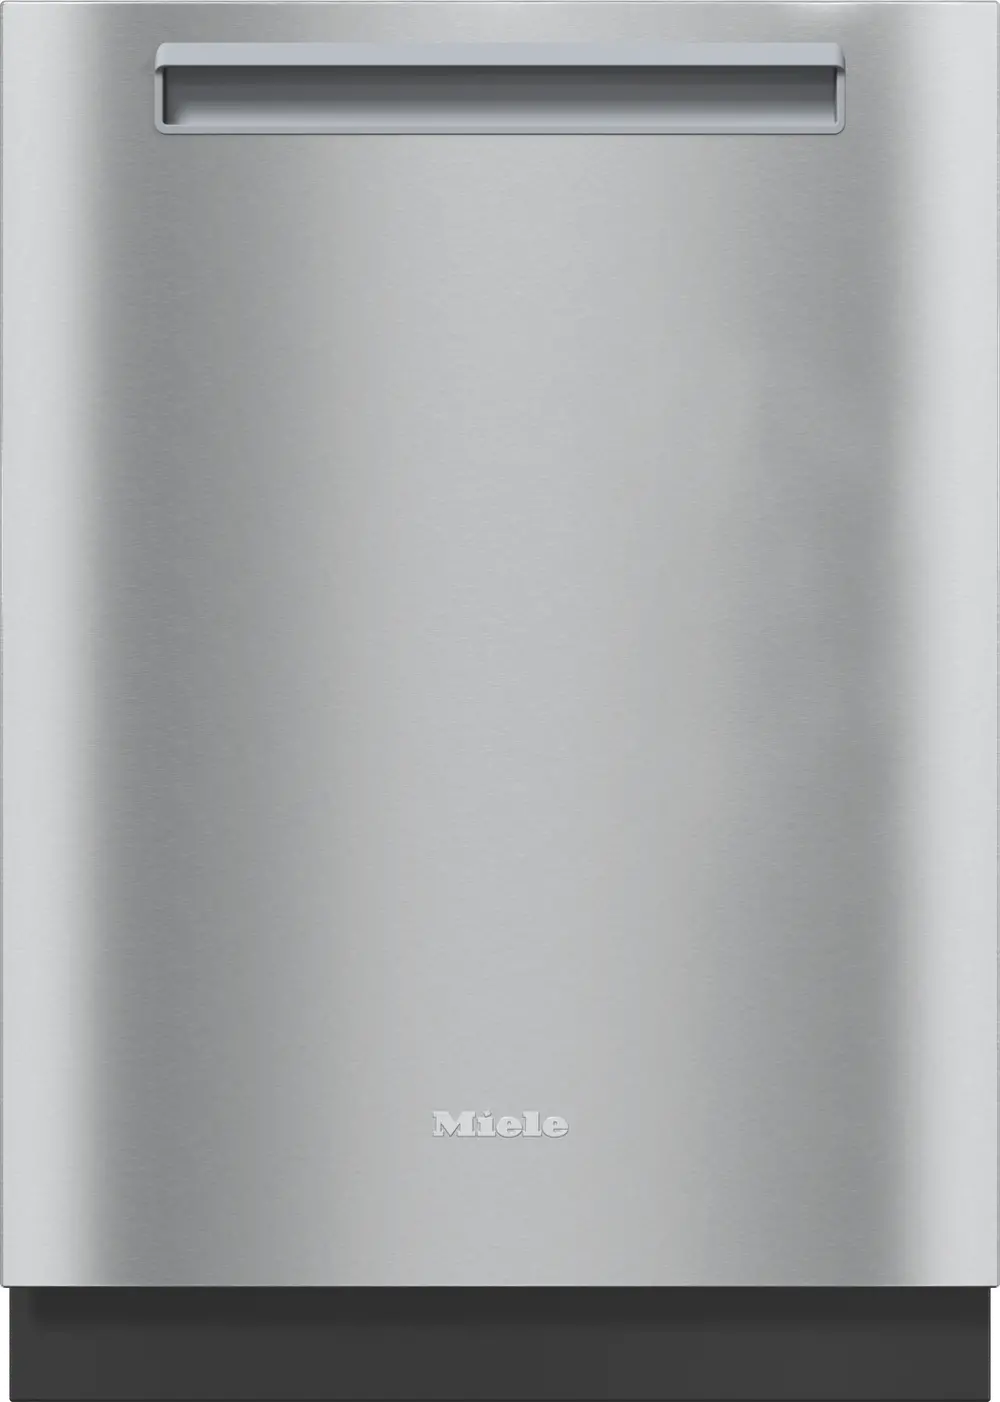 Miele Top Control Dishwasher - Stainless Steel-1